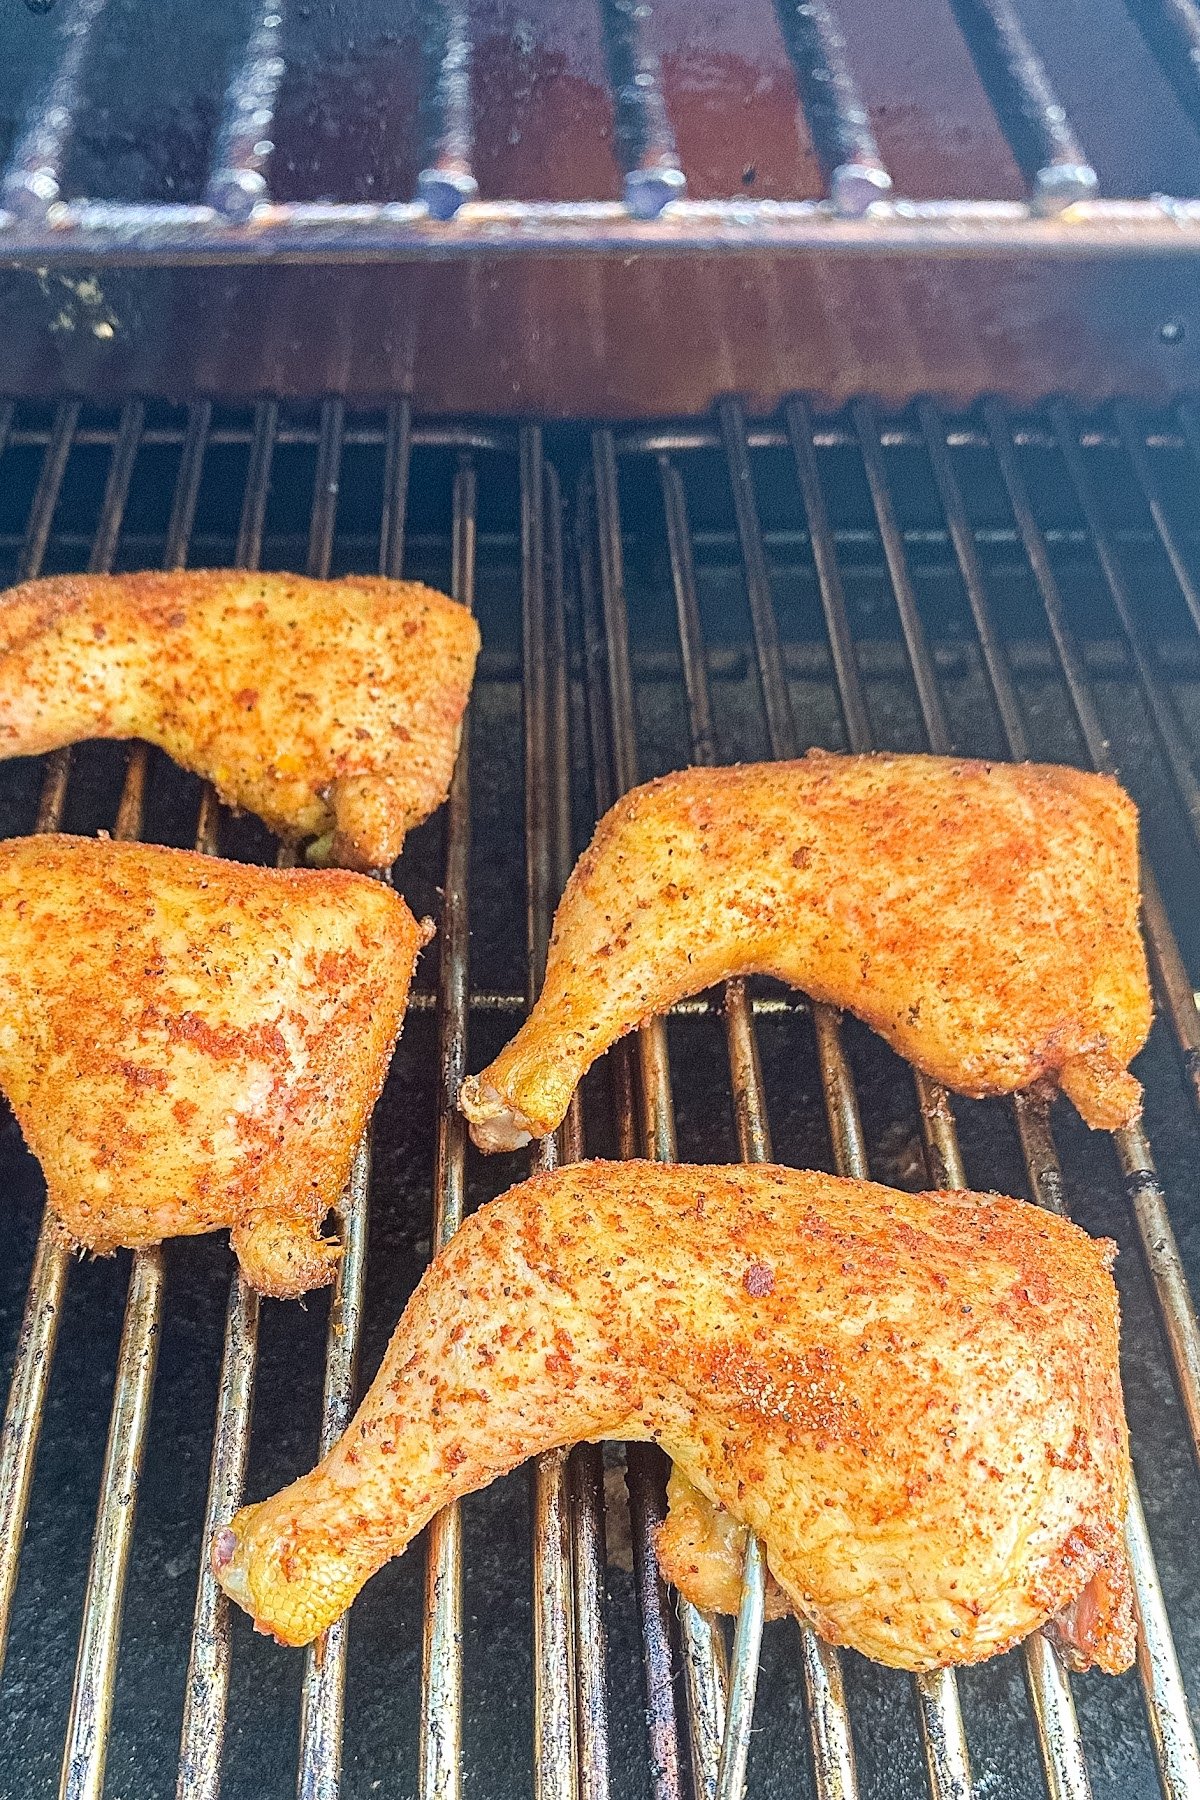 Chicken leg quarters on the grill.